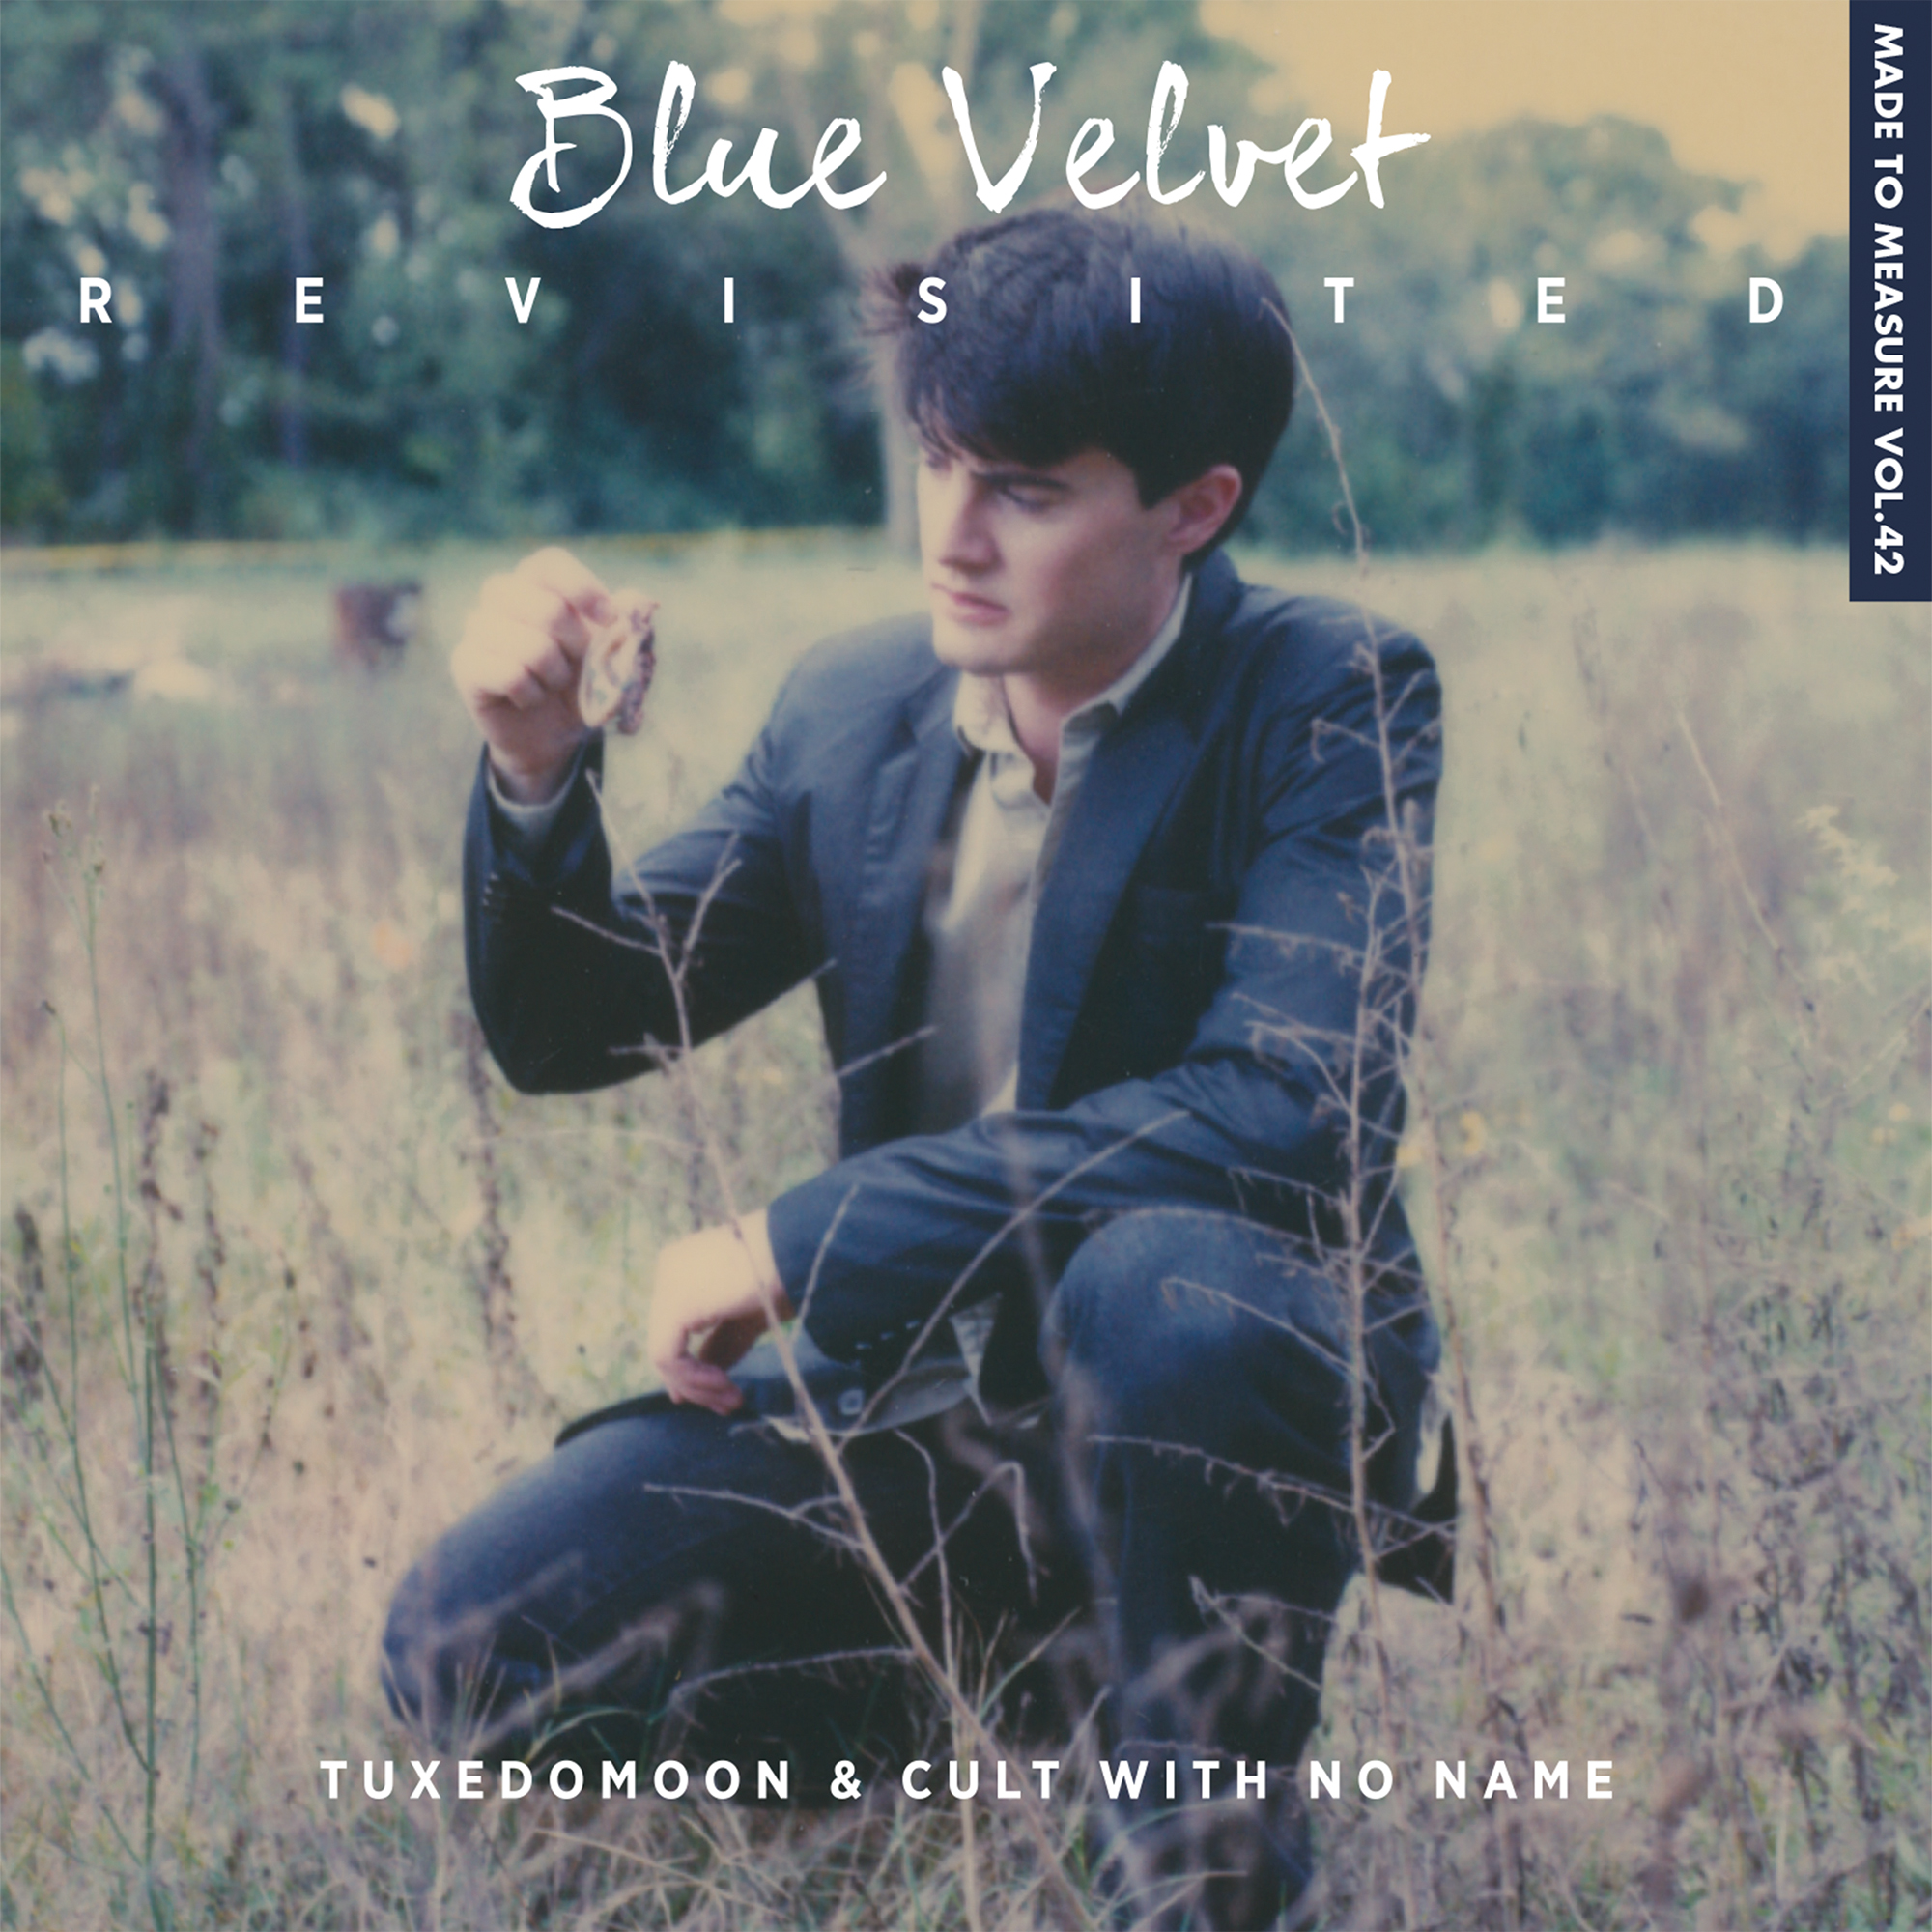 TUXEDOMOON & CULT WITH NO NAME - Blue Velvet Revisited